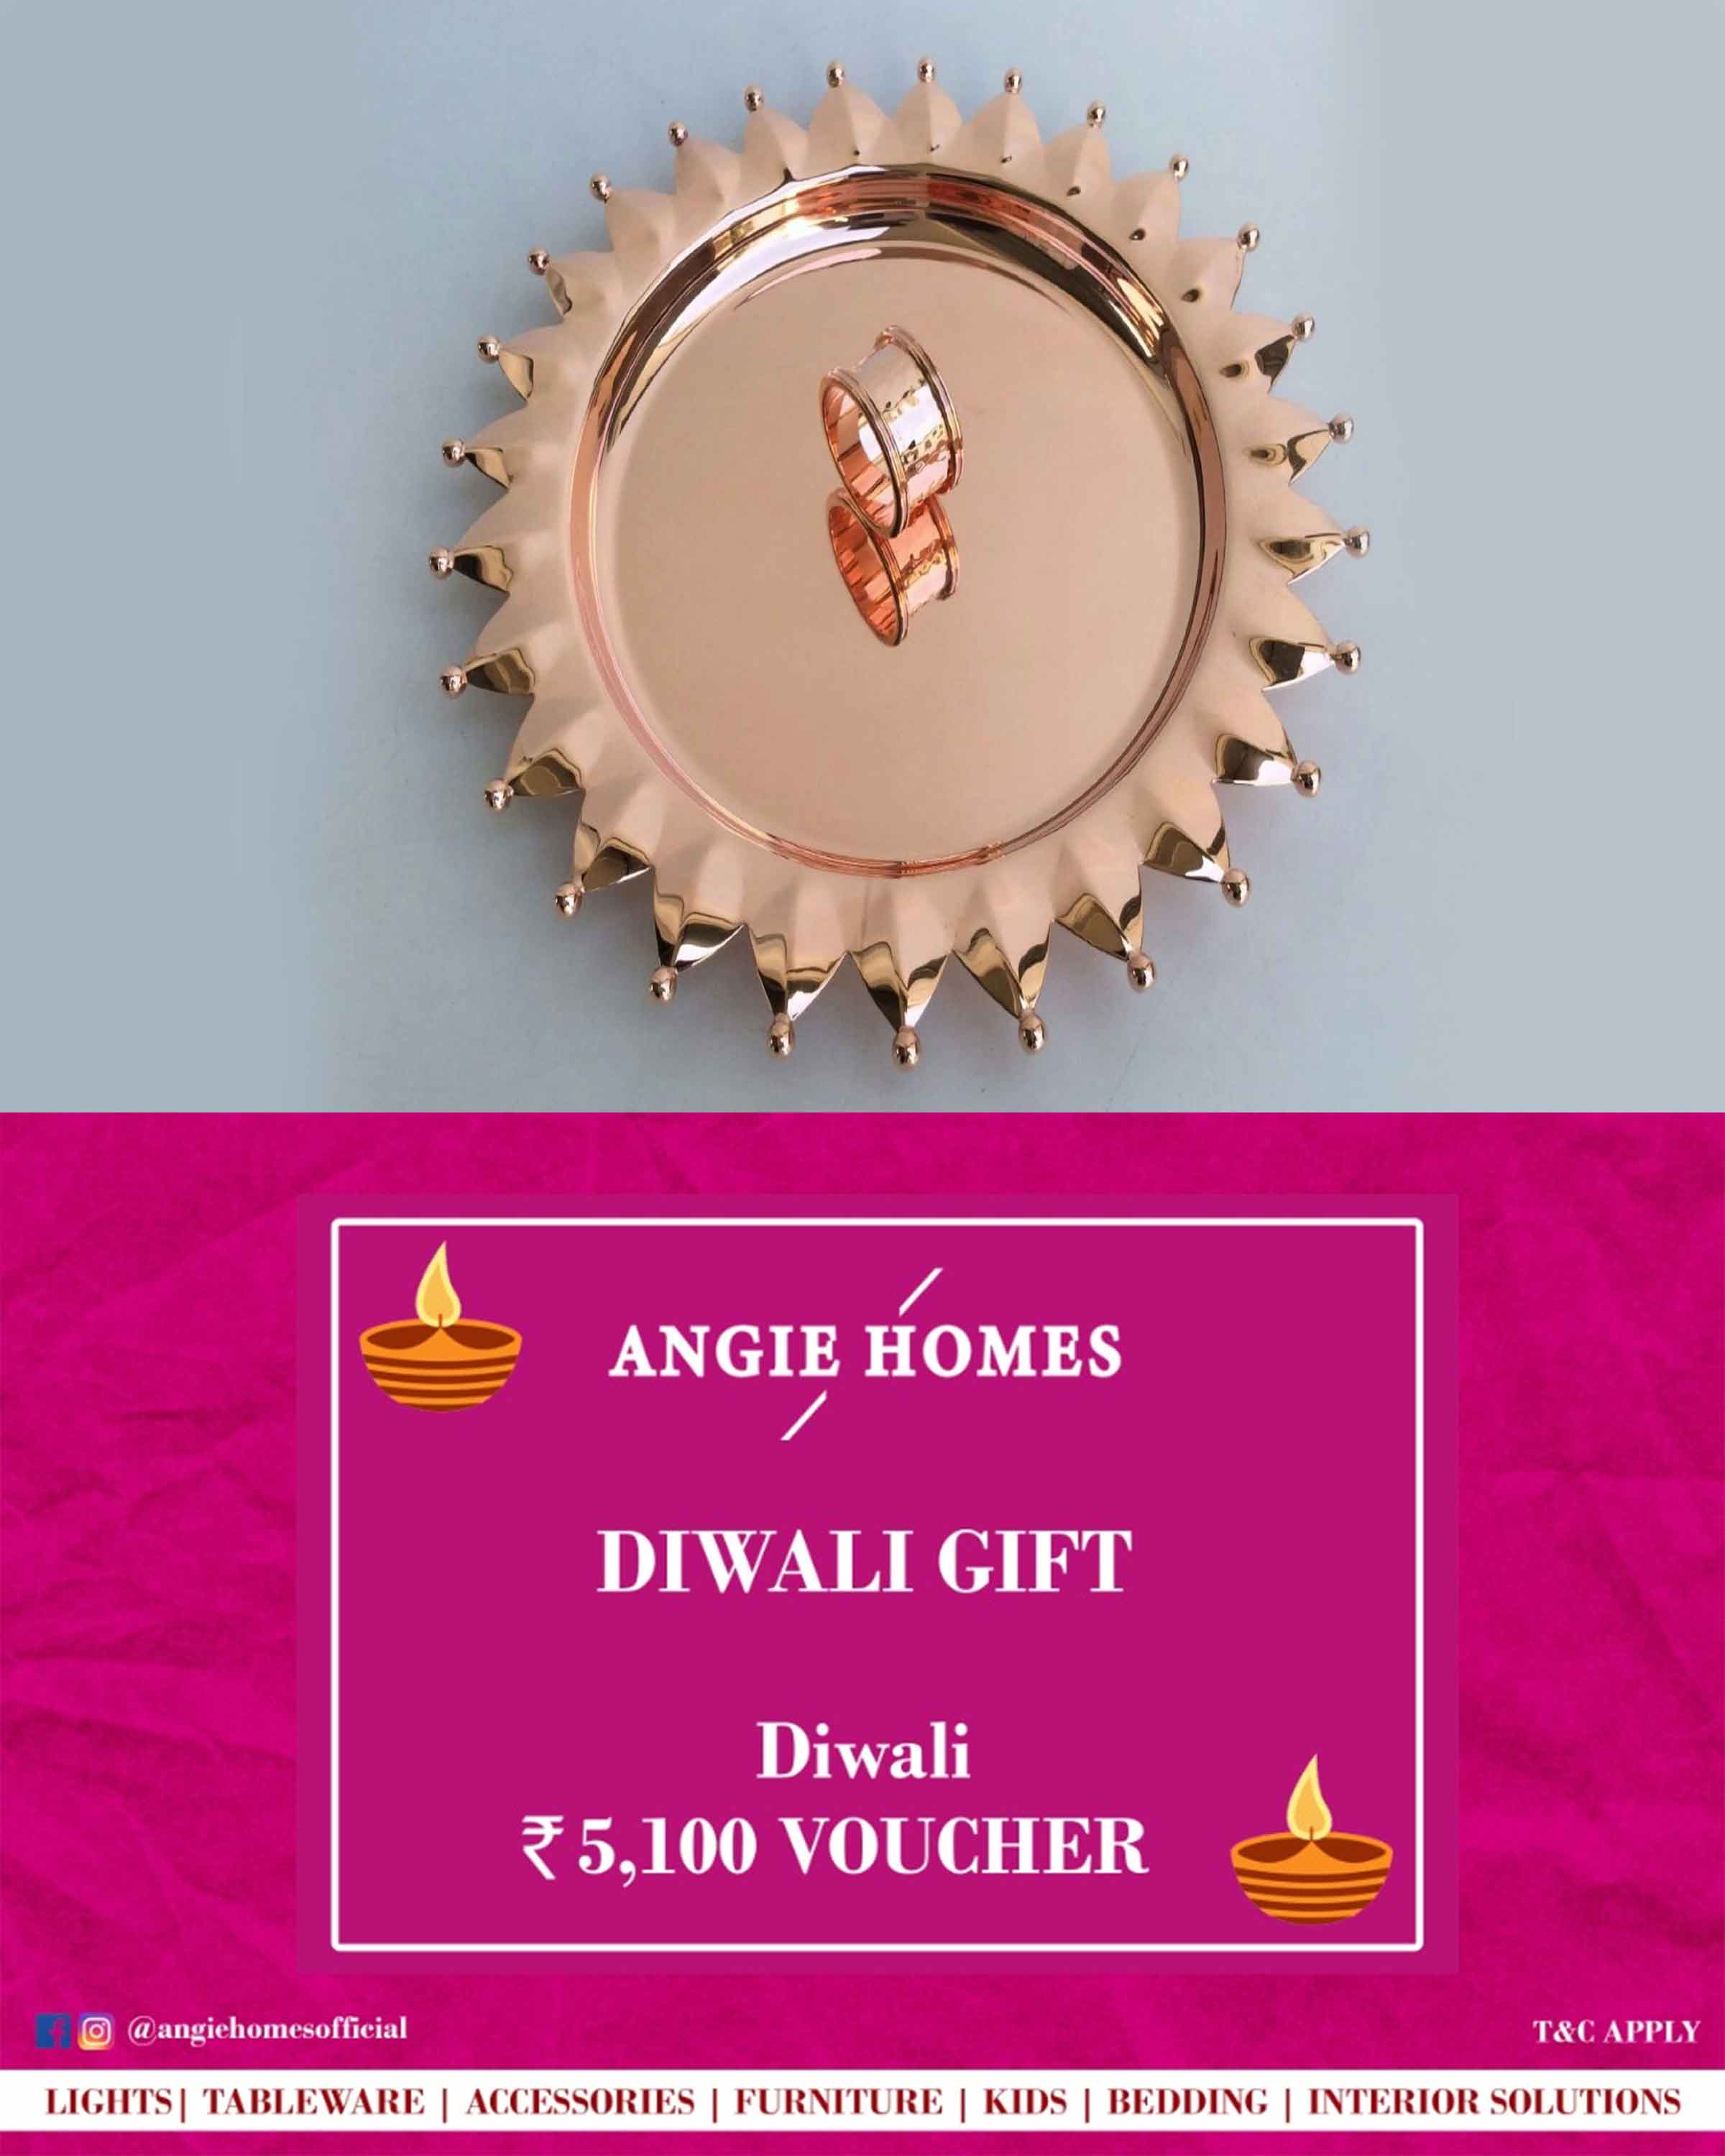 Online Diwali Gift Card Voucher for Gold Finish Plate with Napkin Ring ANGIE HOMES